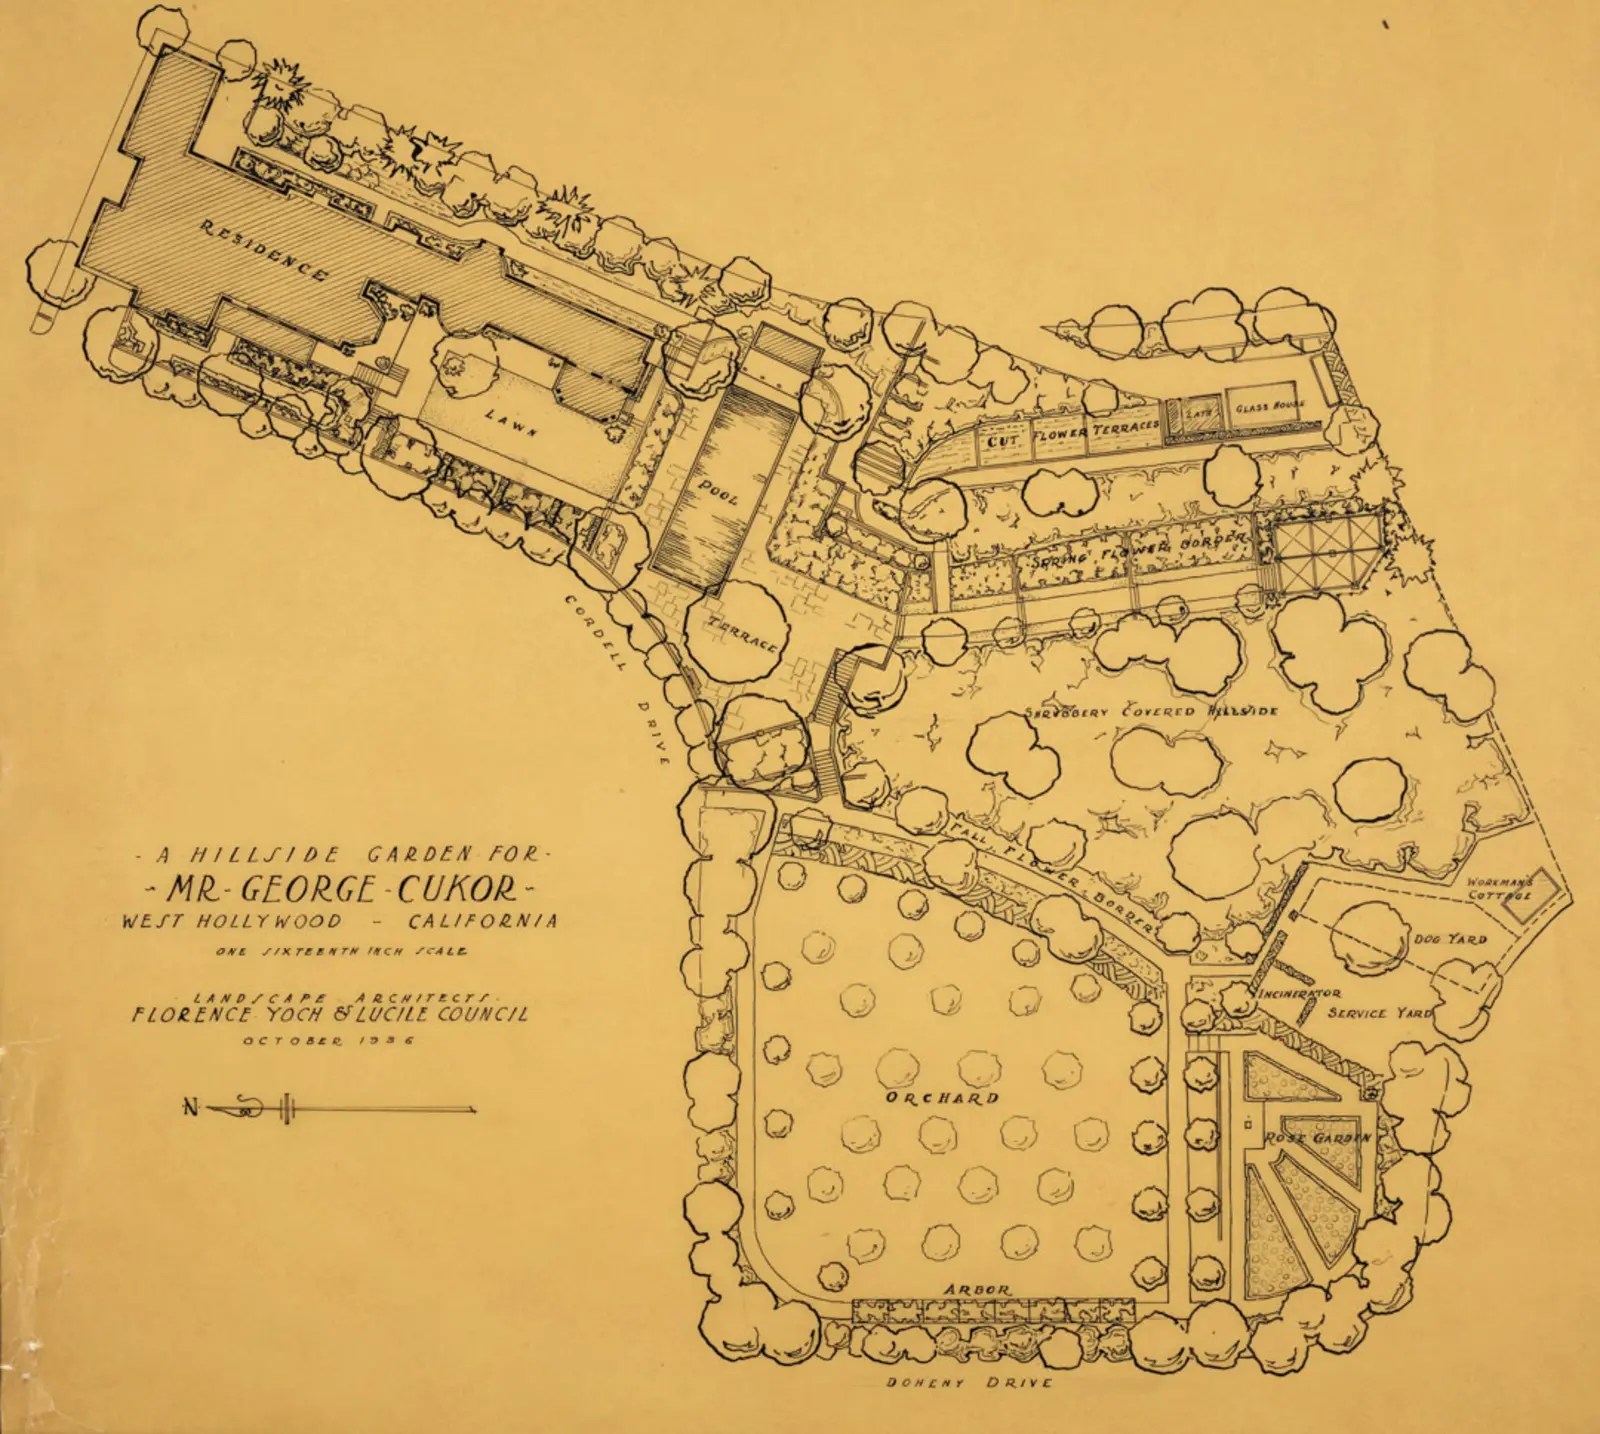 A landscape drawing on yellow paper of a large garden with plans for an orchard, a cut flower garden, and a pool.